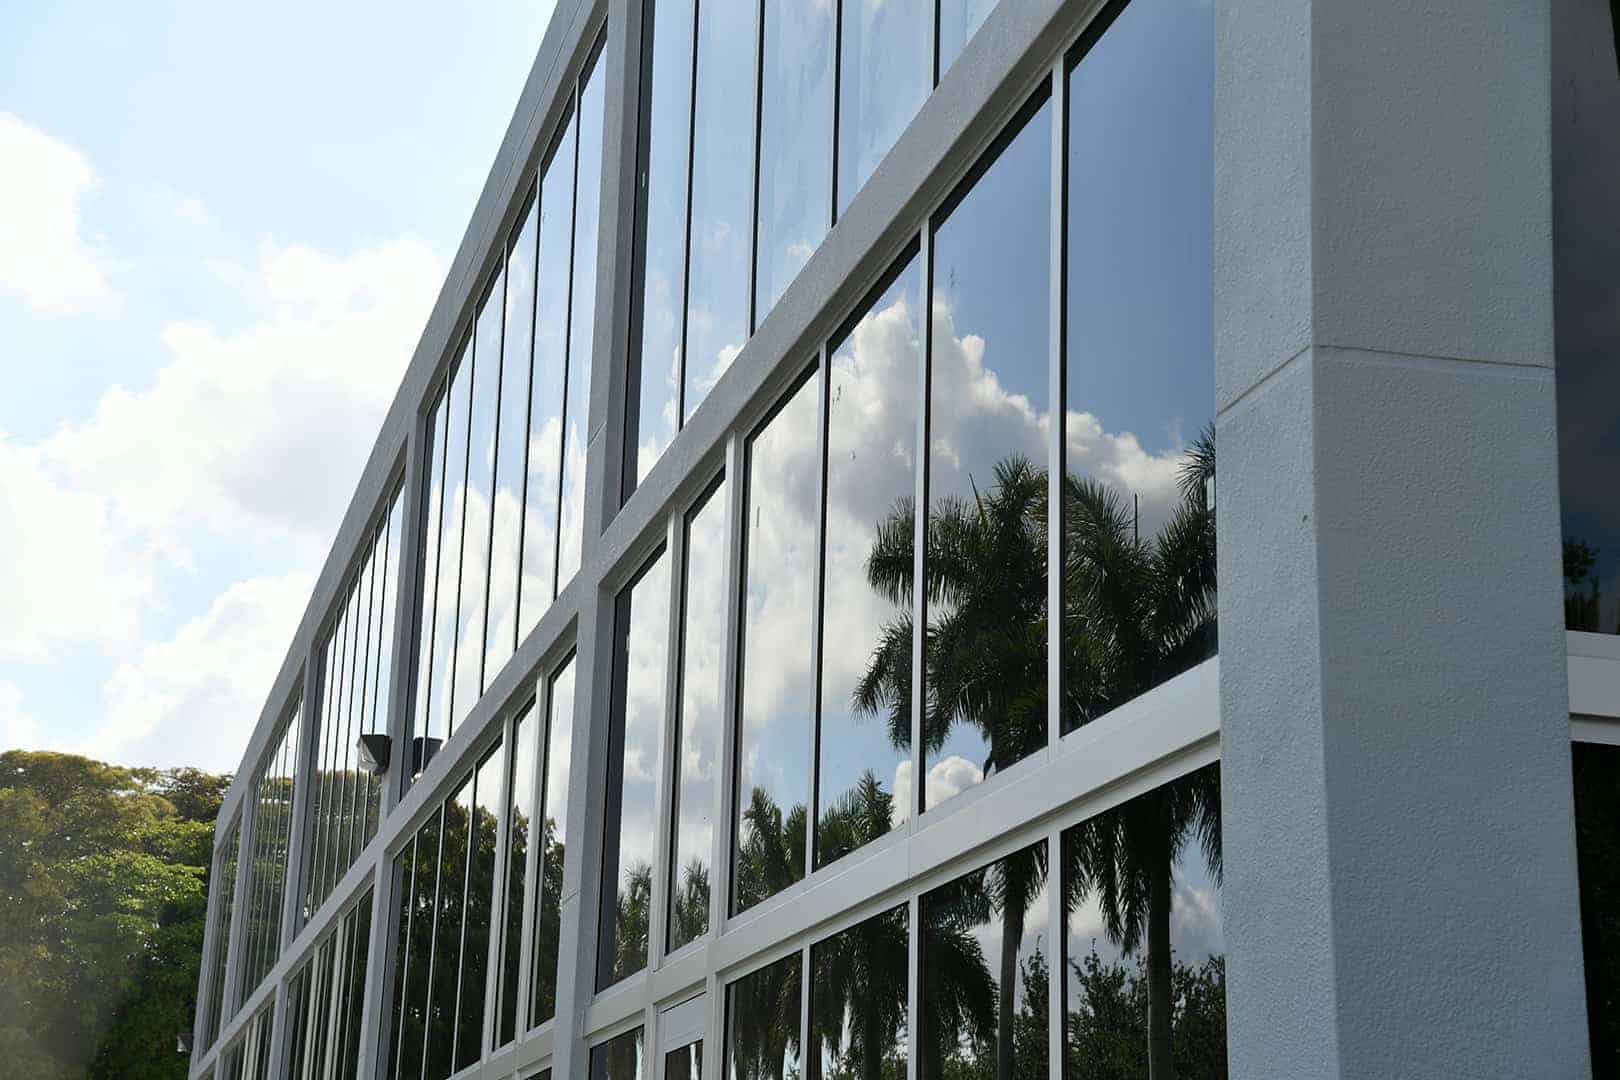 Side view of commercial building with front glazed system from Aldora.